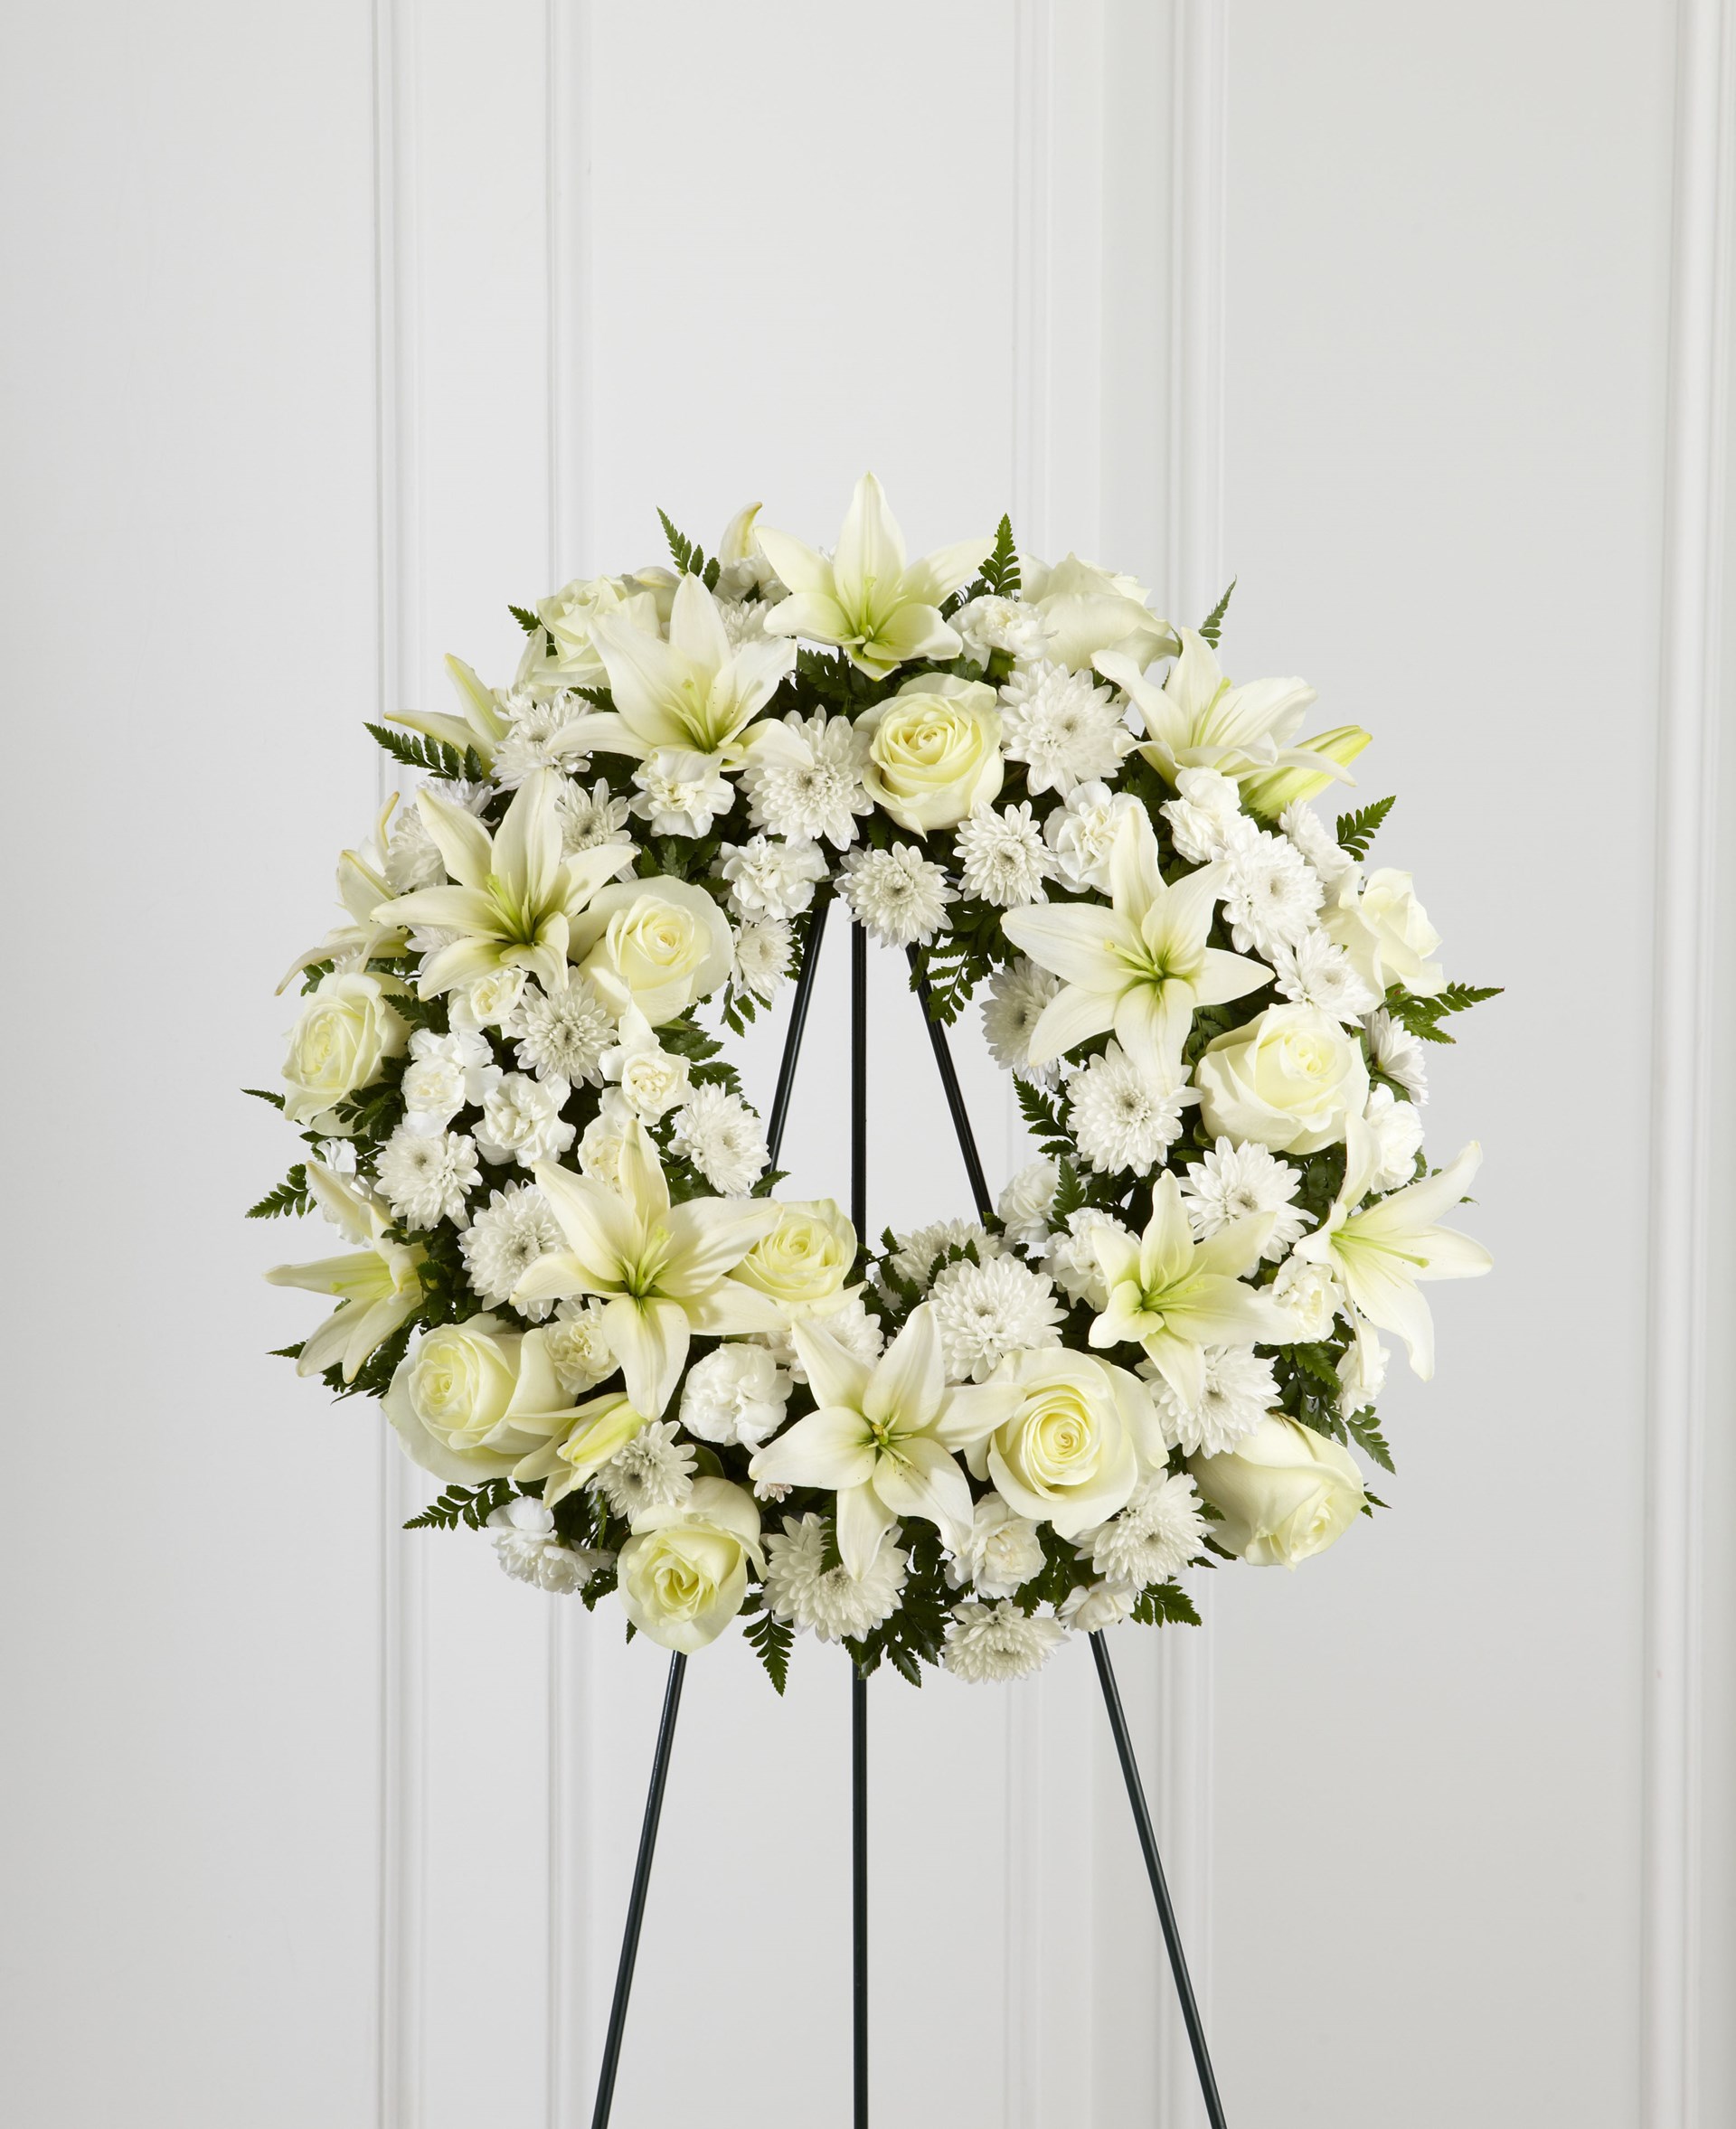 product image for The FTD Treasured Tribute Wreath